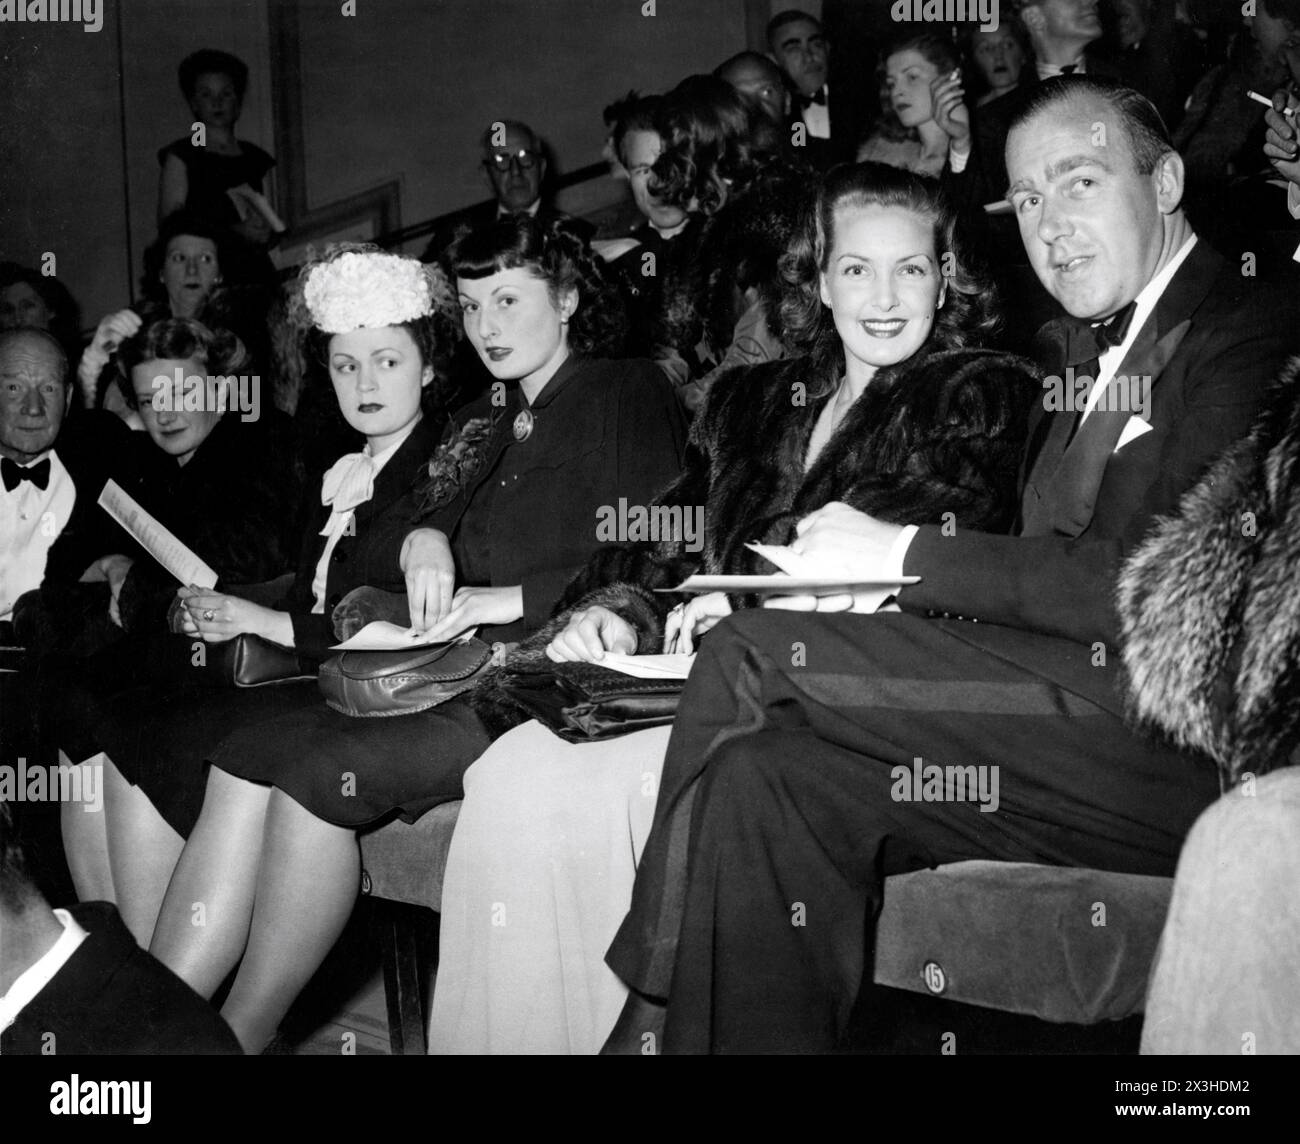 PATRICIA ROC and RONALD NEAME (at right) at the premiere at The New Gallery cinema, Regent Street, London in June 1947 of GOOGIE WITHERS JEAN KENT and JOHN McCALLUM in THE LOVES OF JOANNA GODDEN 1947 directors CHARLES FREND and (uncredited) ROBERT HAMER novel Sheila Kaye-Smith screenplay H.E. Bates music Ralph Vaughan Williams producer Michael Balcon Ealing Studios / General Film Distributors (GFD) Stock Photo